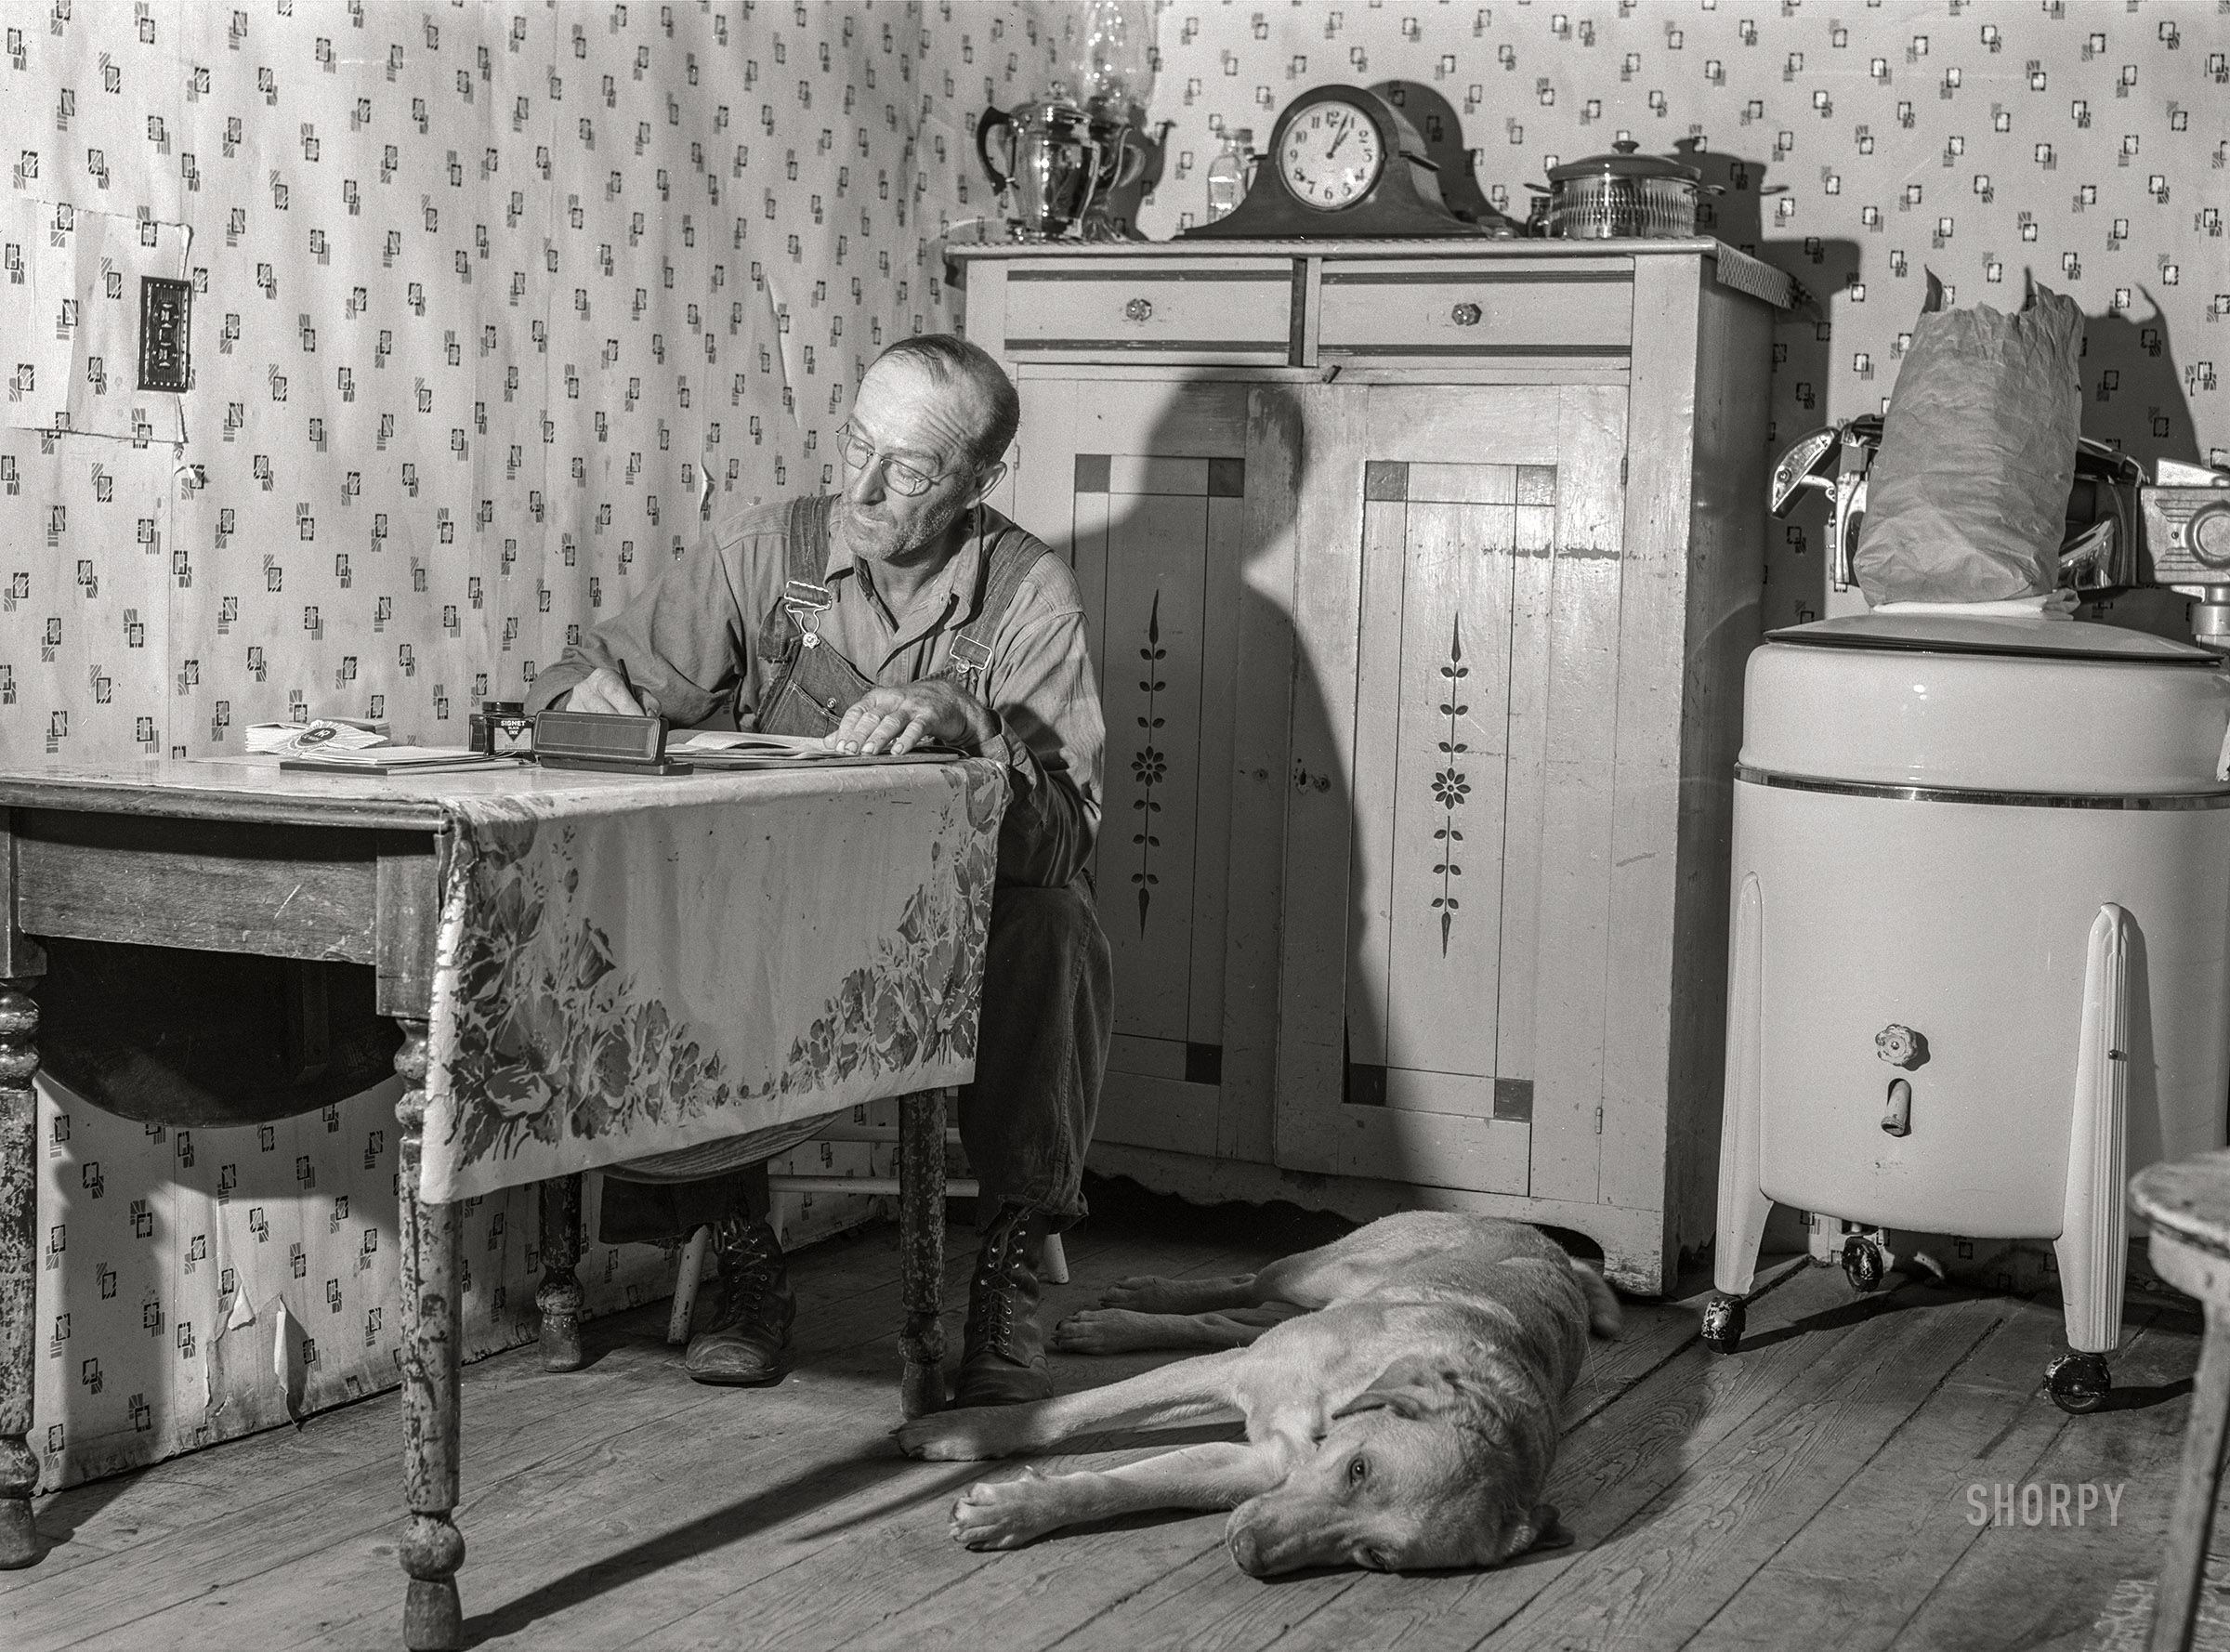 August 1941. "FSA borrower working on accounts. Itasca County, Minnesota." Medium format acetate negative by John Vachon for the Farm Security Administration. View full size.